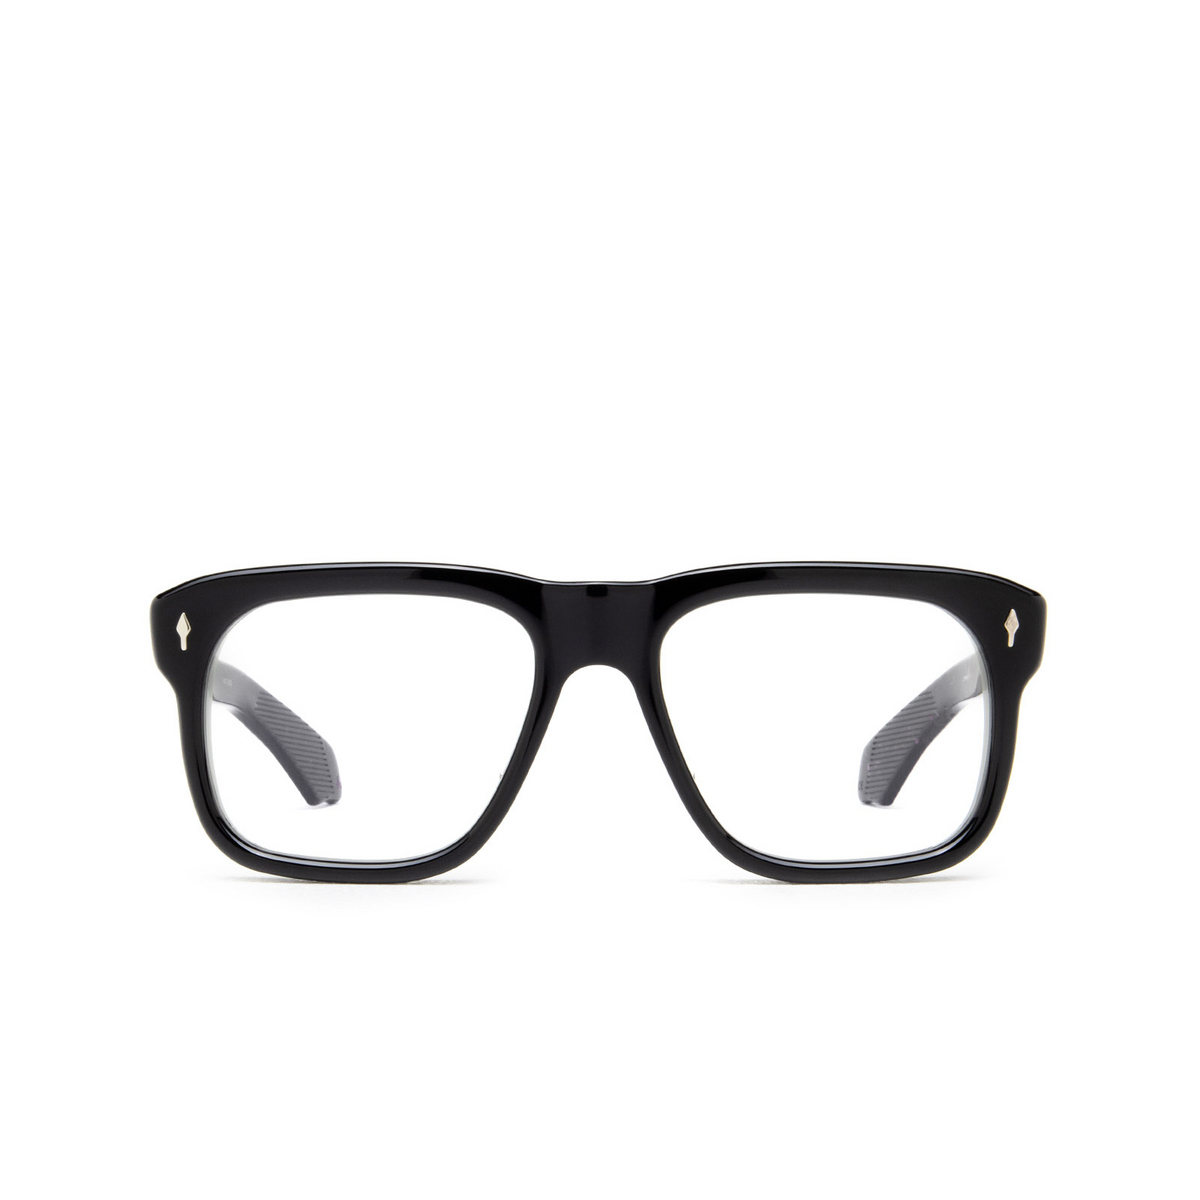 Jacques Marie Mage YVES Eyeglasses MARQUINA - front view